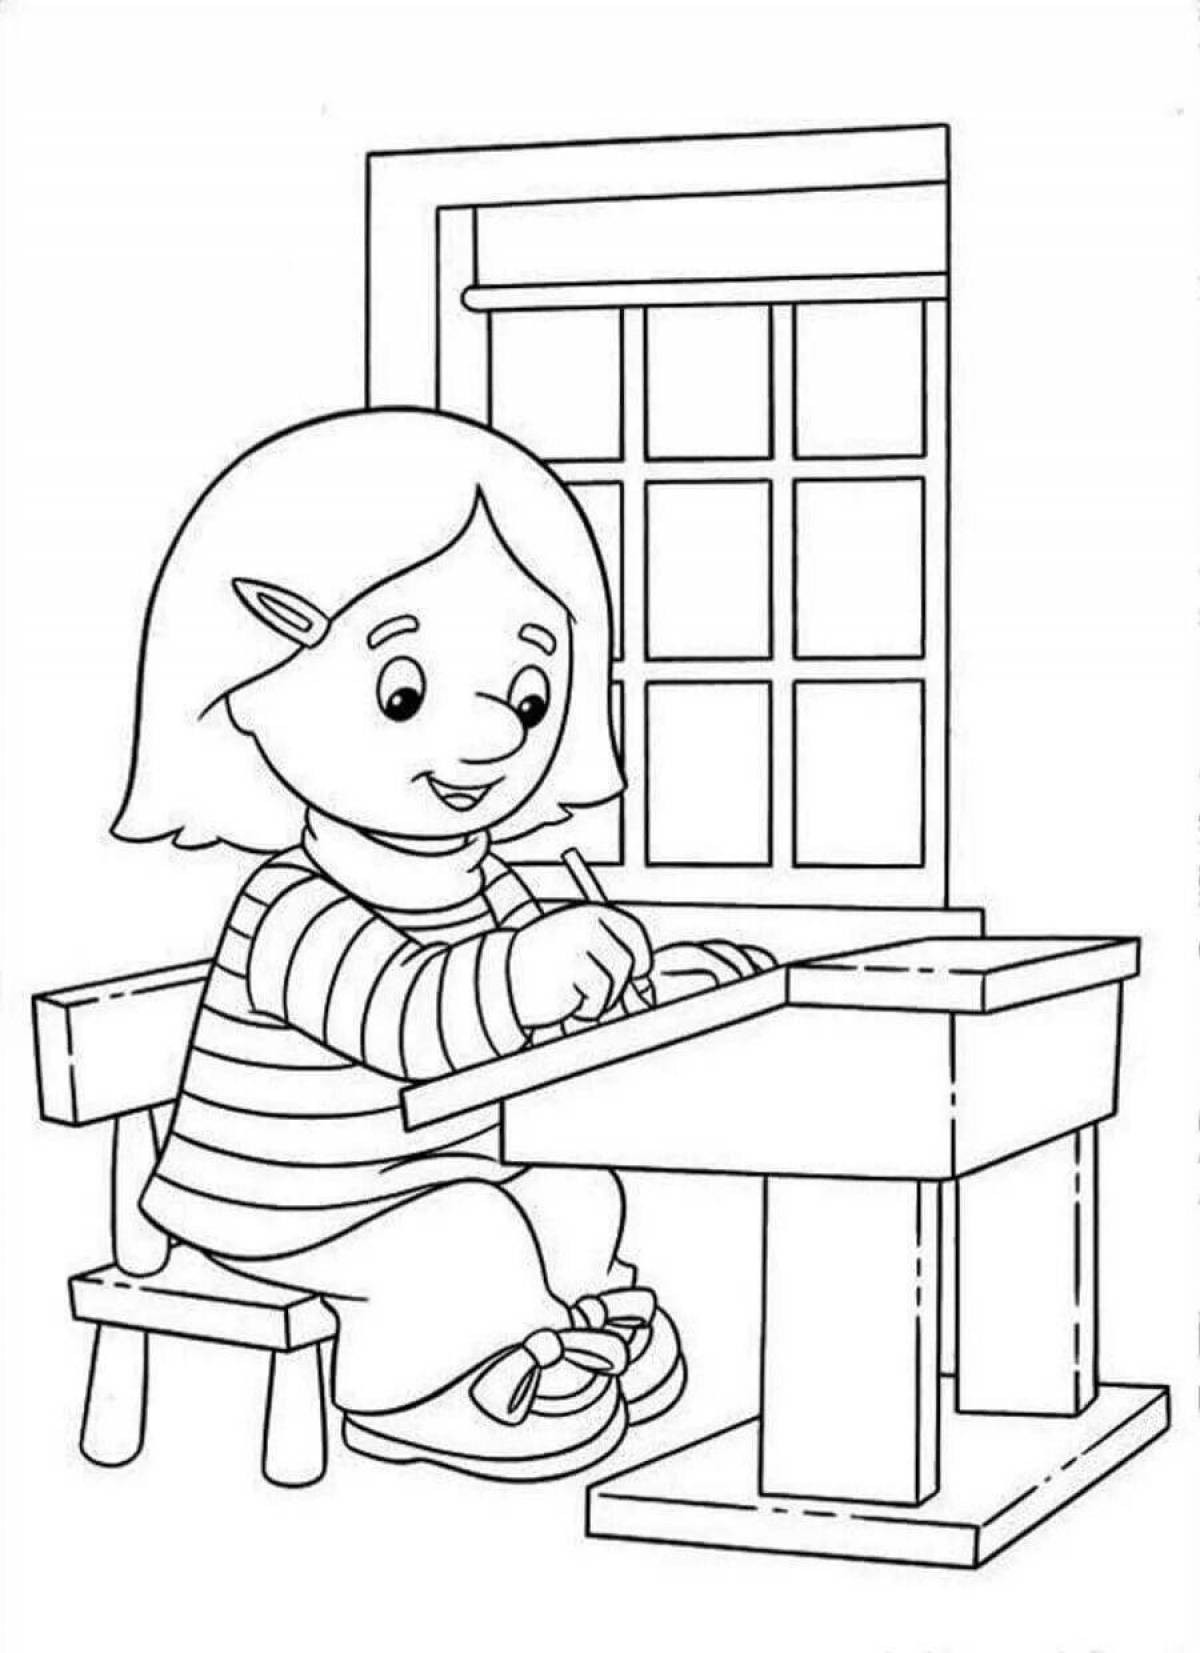 An animated student at a desk